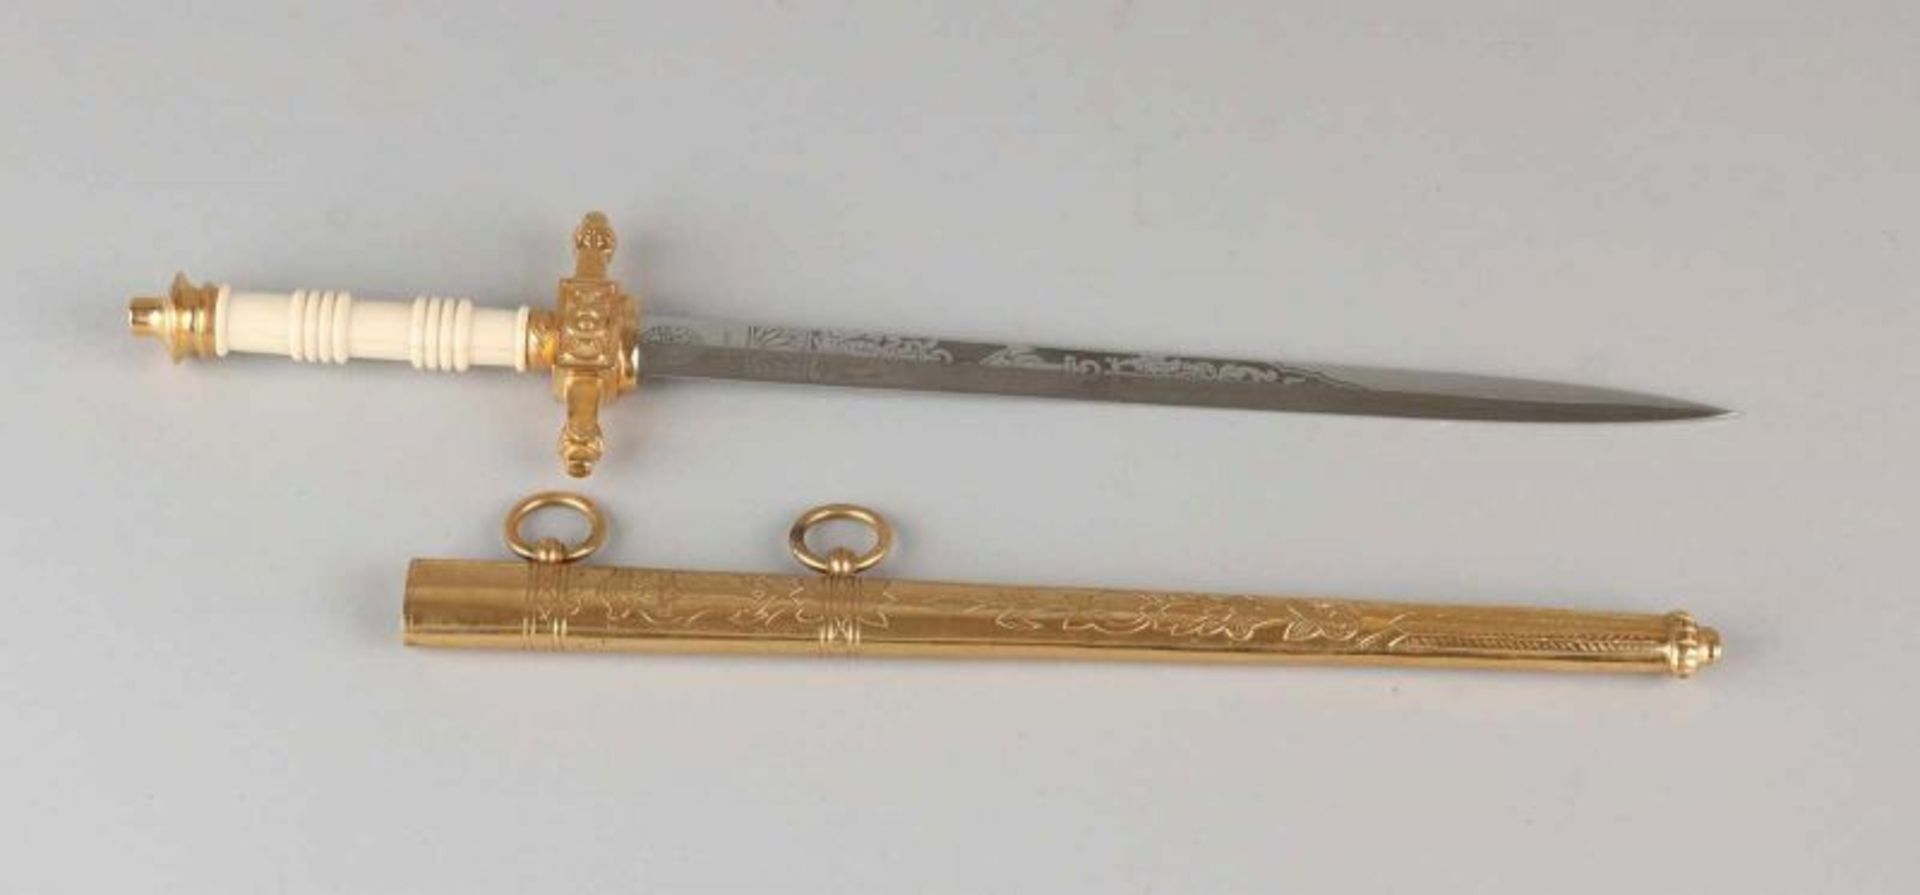 Old gilded (navy) dirk. Parada dagger. Signature E. F. Hofster - Solingen. 20th century. Dimensions: